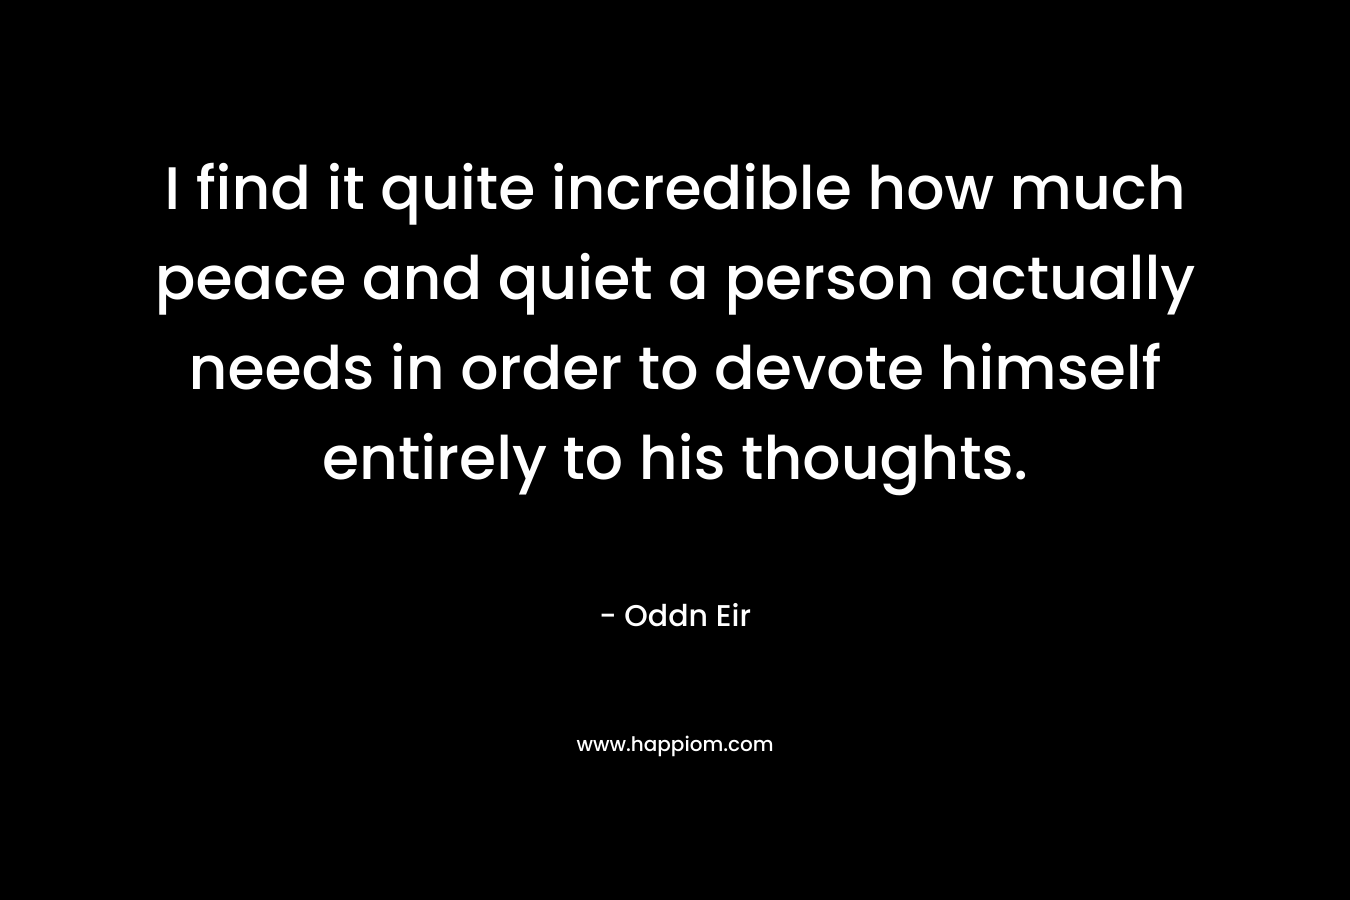 I find it quite incredible how much peace and quiet a person actually needs in order to devote himself entirely to his thoughts.